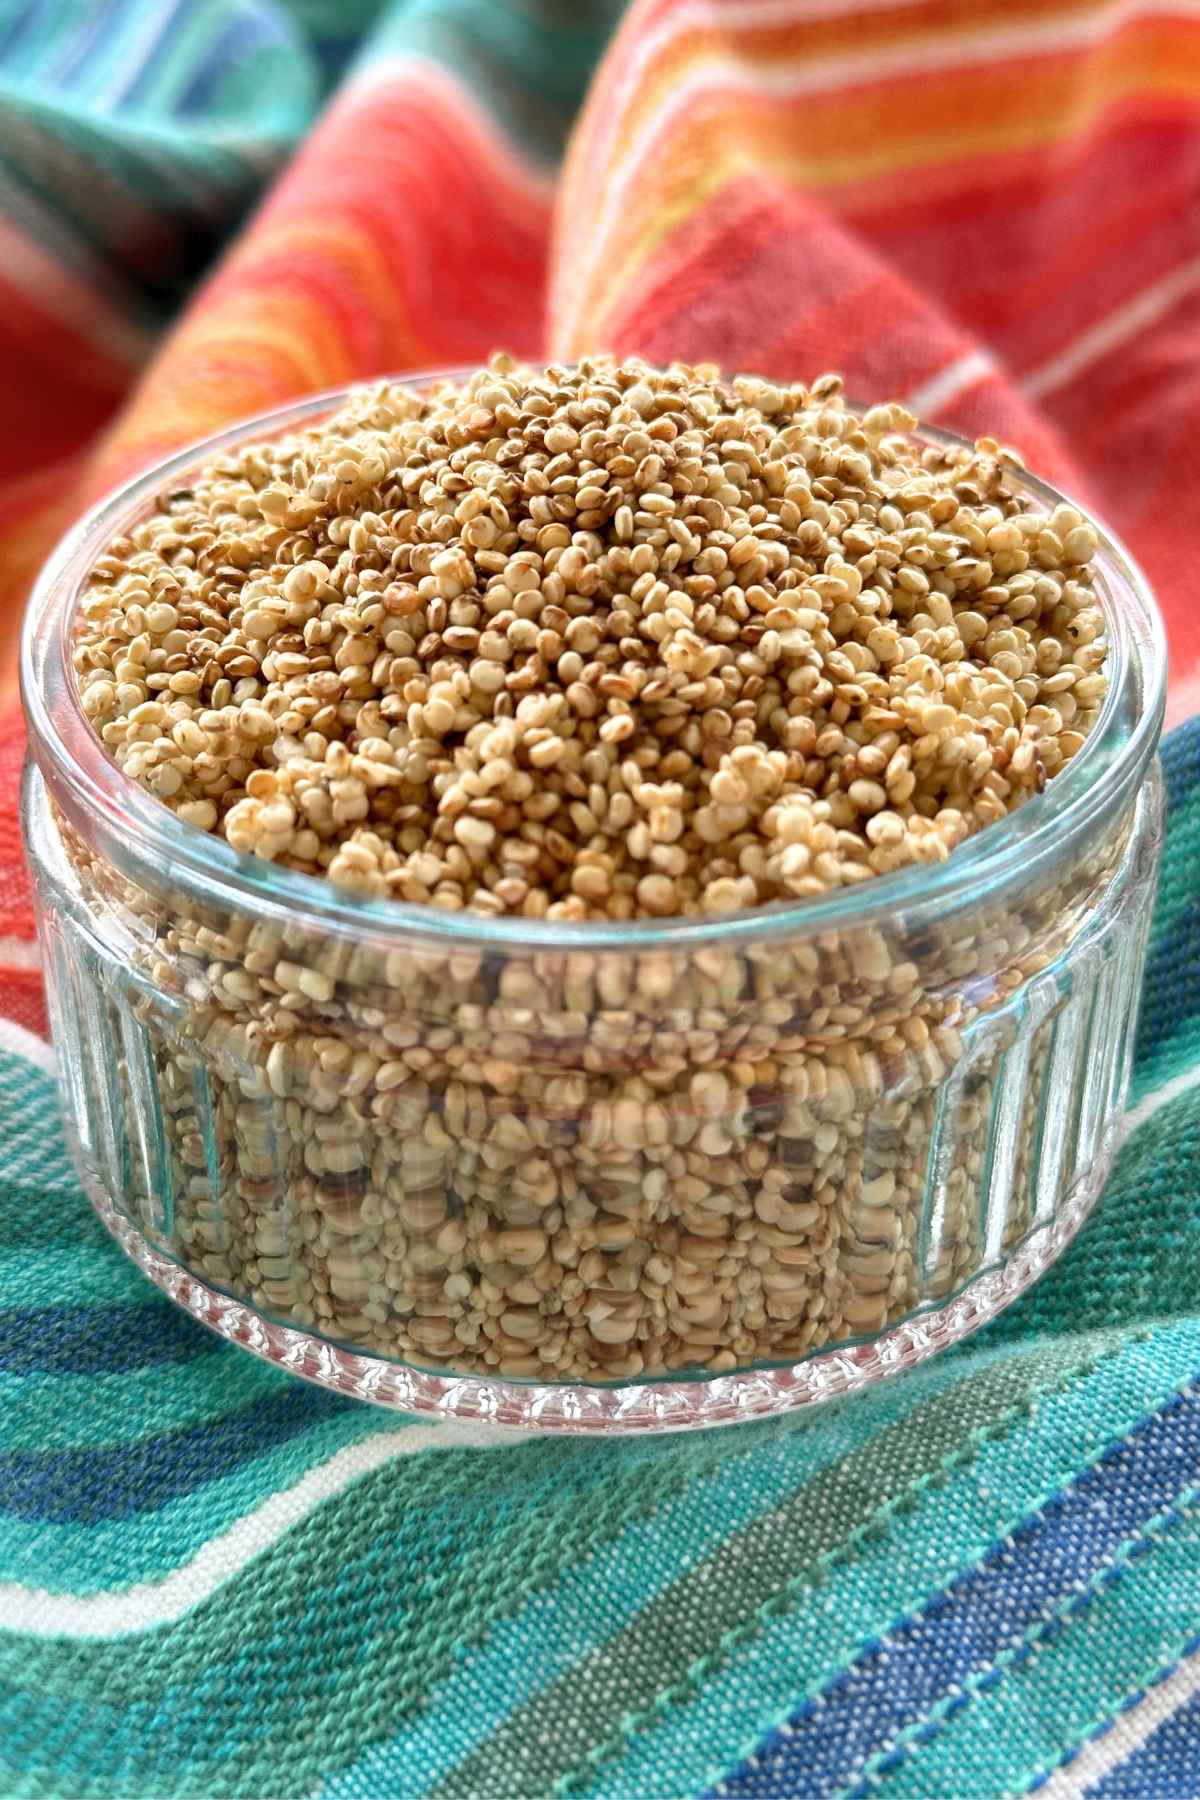 Glass bowl filled with golden colored popped quinoa seeds on red, orange, and blue cloth napkin in background.